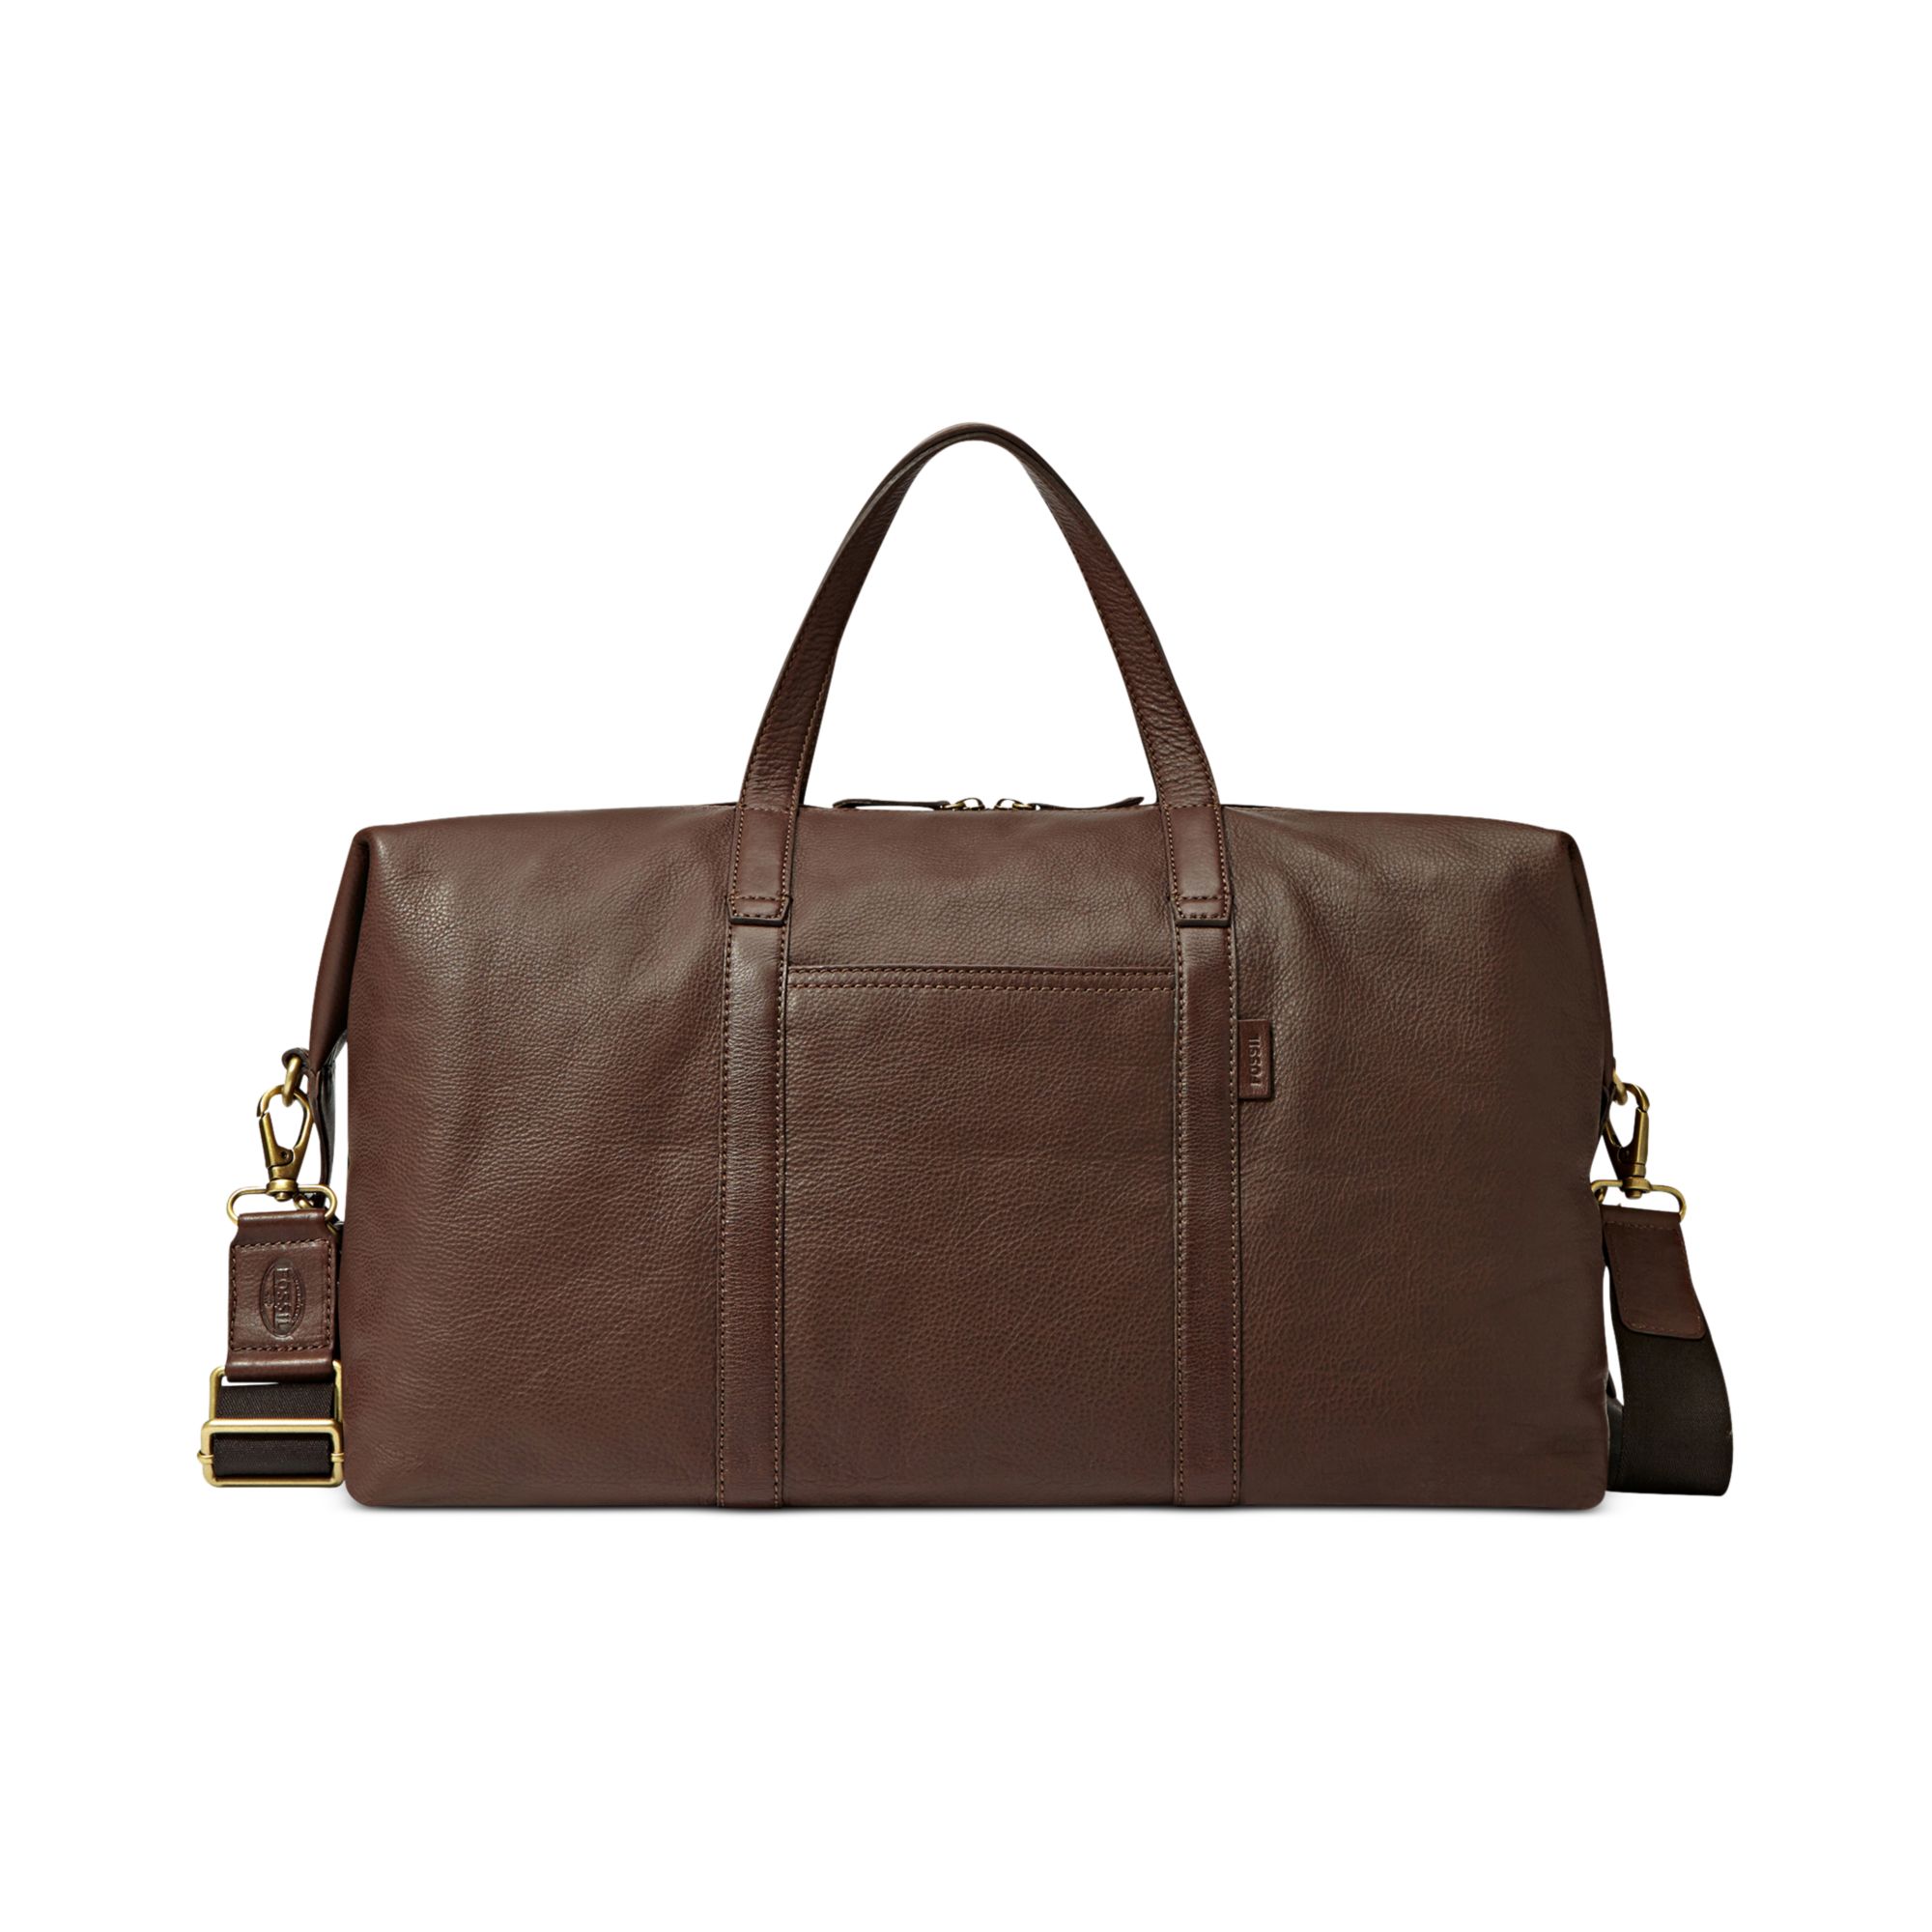 Fossil Leather Duffle Bag | IUCN Water